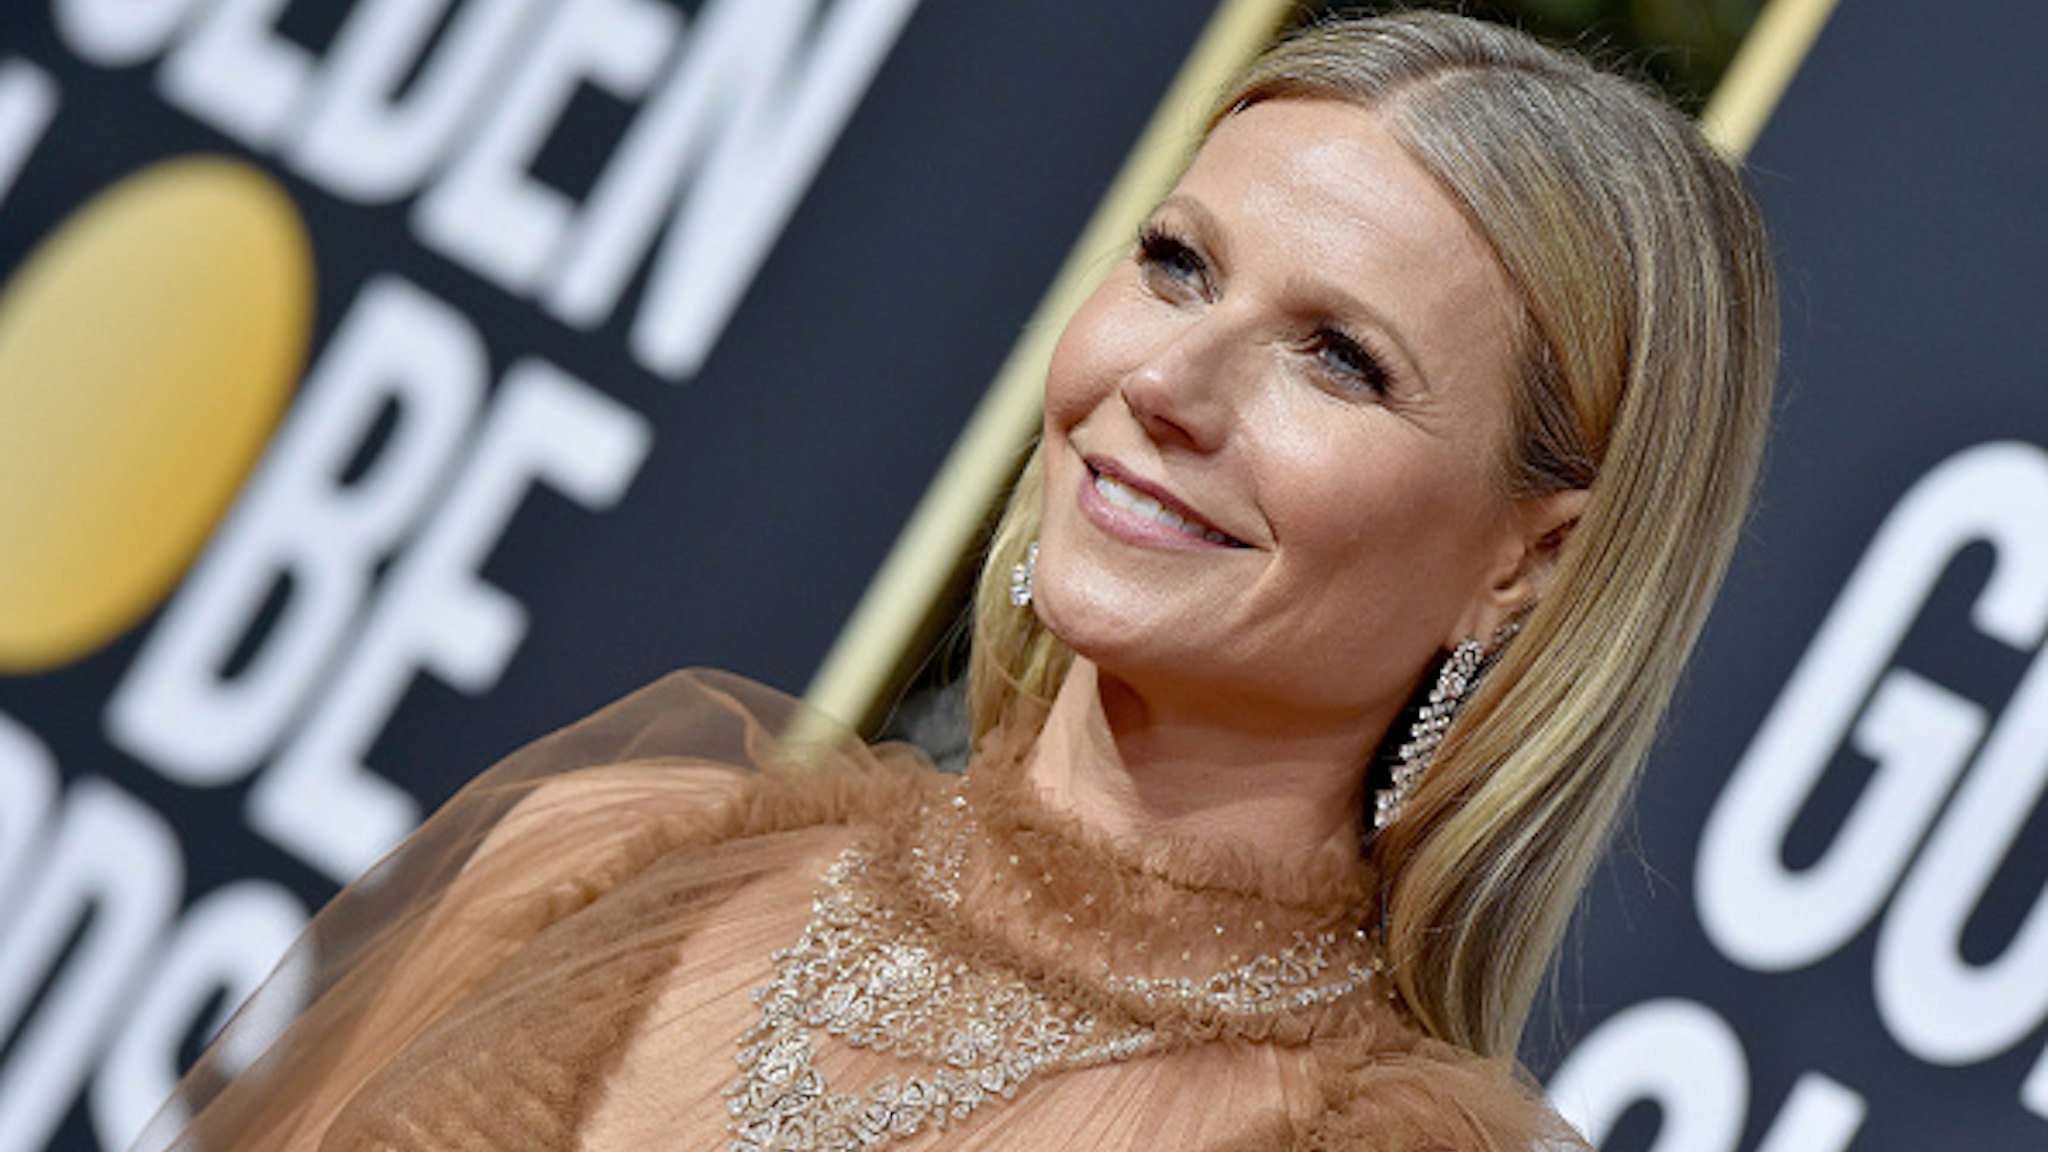 BEVERLY HILLS, CALIFORNIA - JANUARY 05: Gwyneth Paltrow attends the 77th Annual Golden Globe Awards at The Beverly Hilton Hotel on January 05, 2020 in Beverly Hills, California.